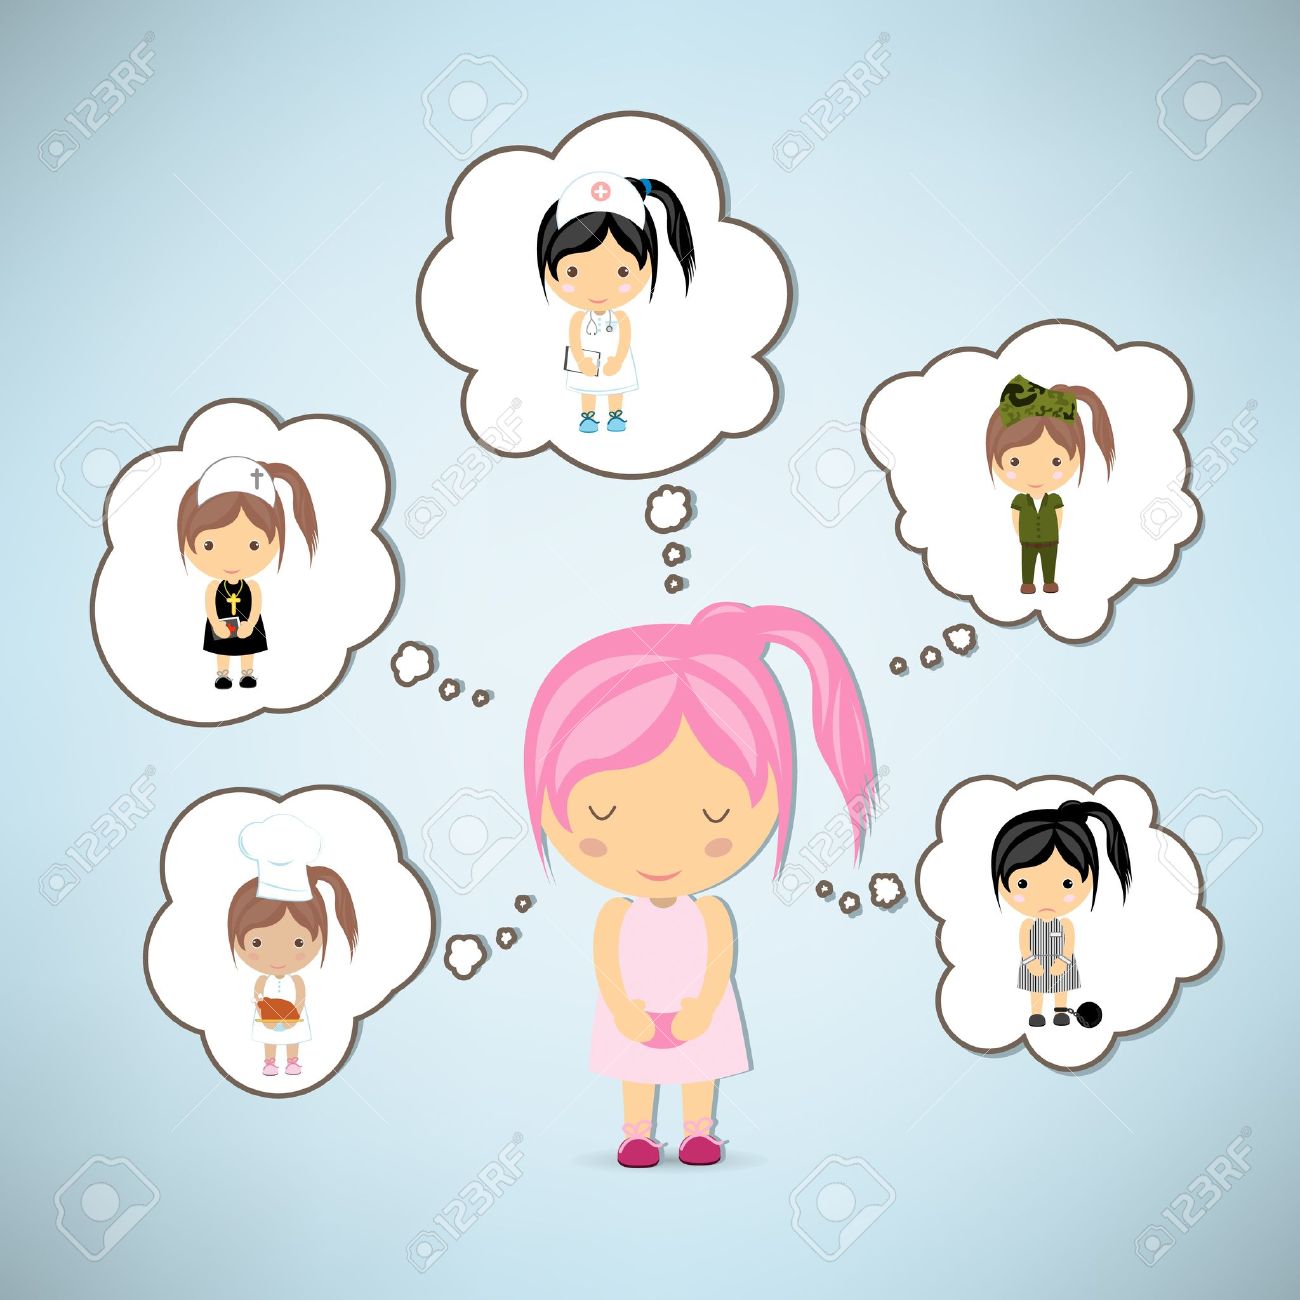 dreaming clipart animated